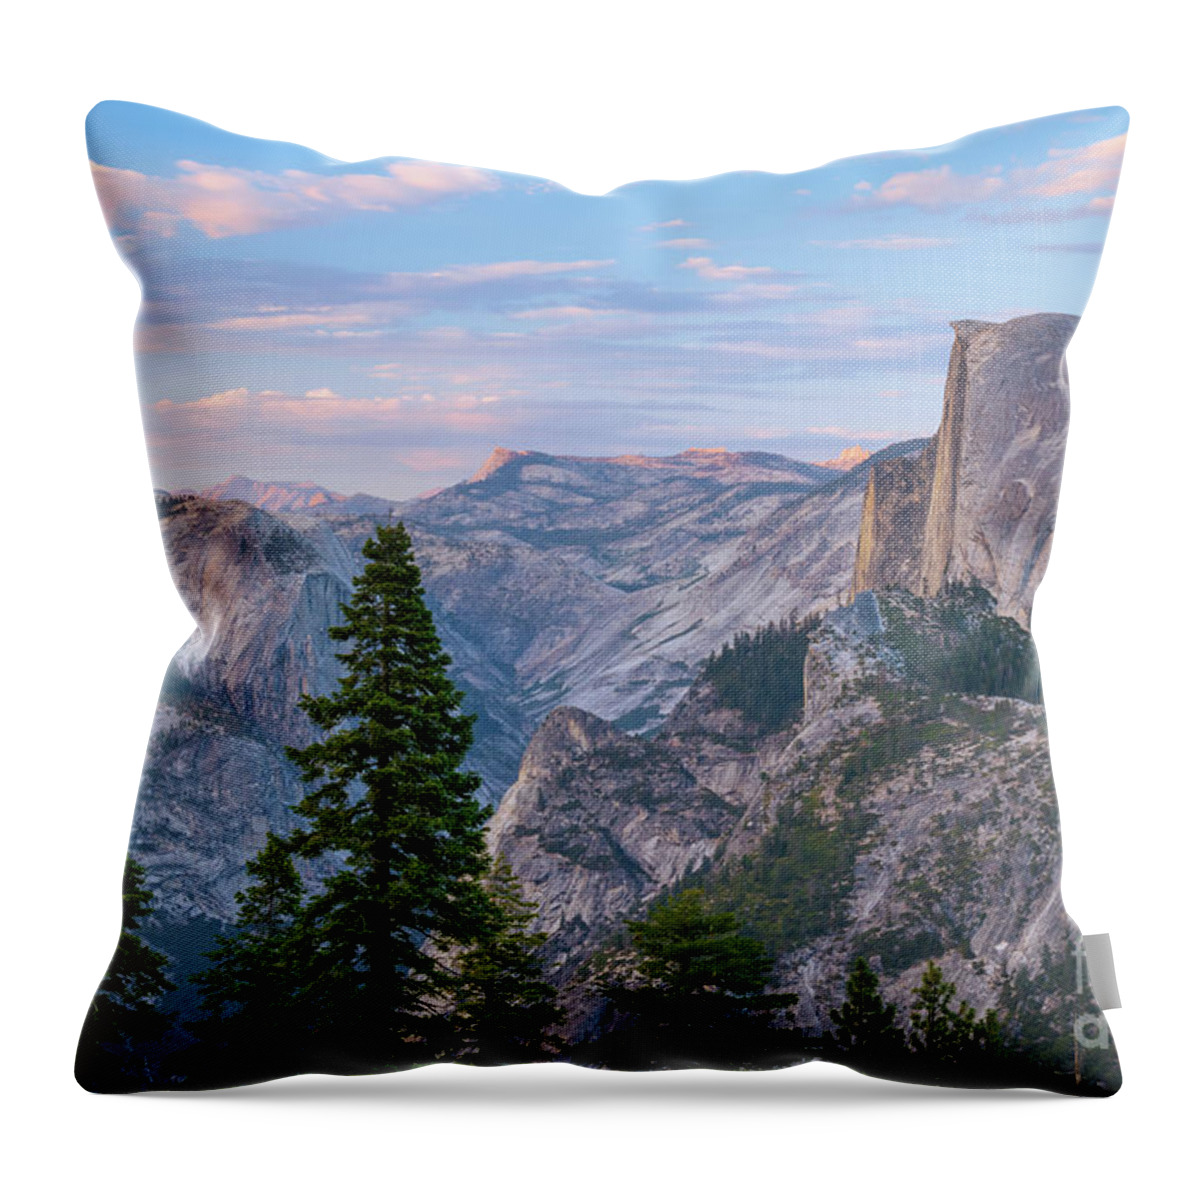  Throw Pillow featuring the photograph Half Dome Sunset by Vincent Bonafede